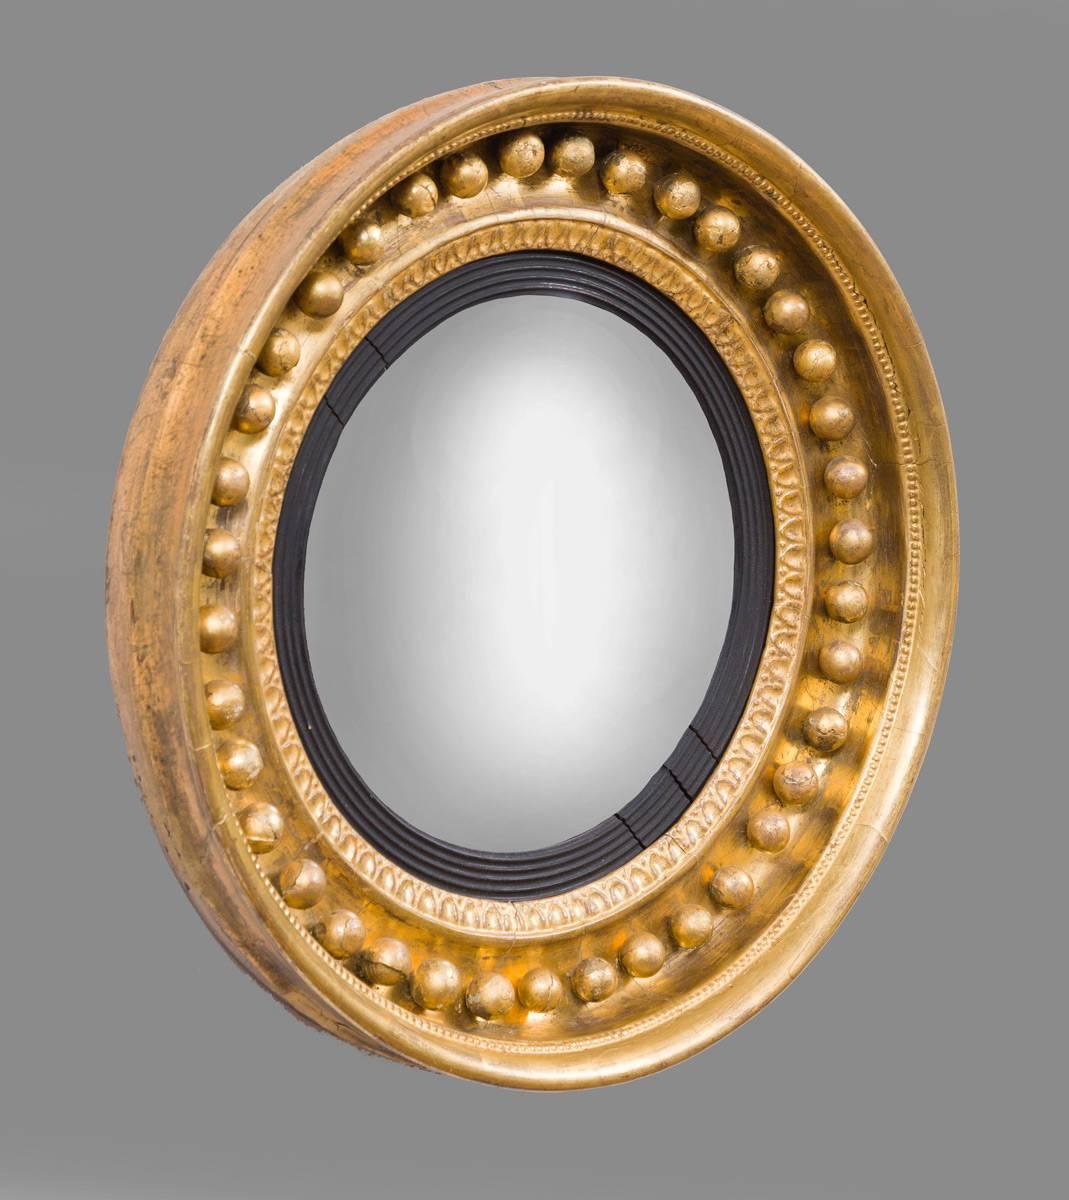 Regency period giltwood convex wall mirror, the circular mirrored plate and reeded slip and egg and dart border set within a deep molded concave frame set with gilded spherules, the outer frame surrounded by a small beaded border.